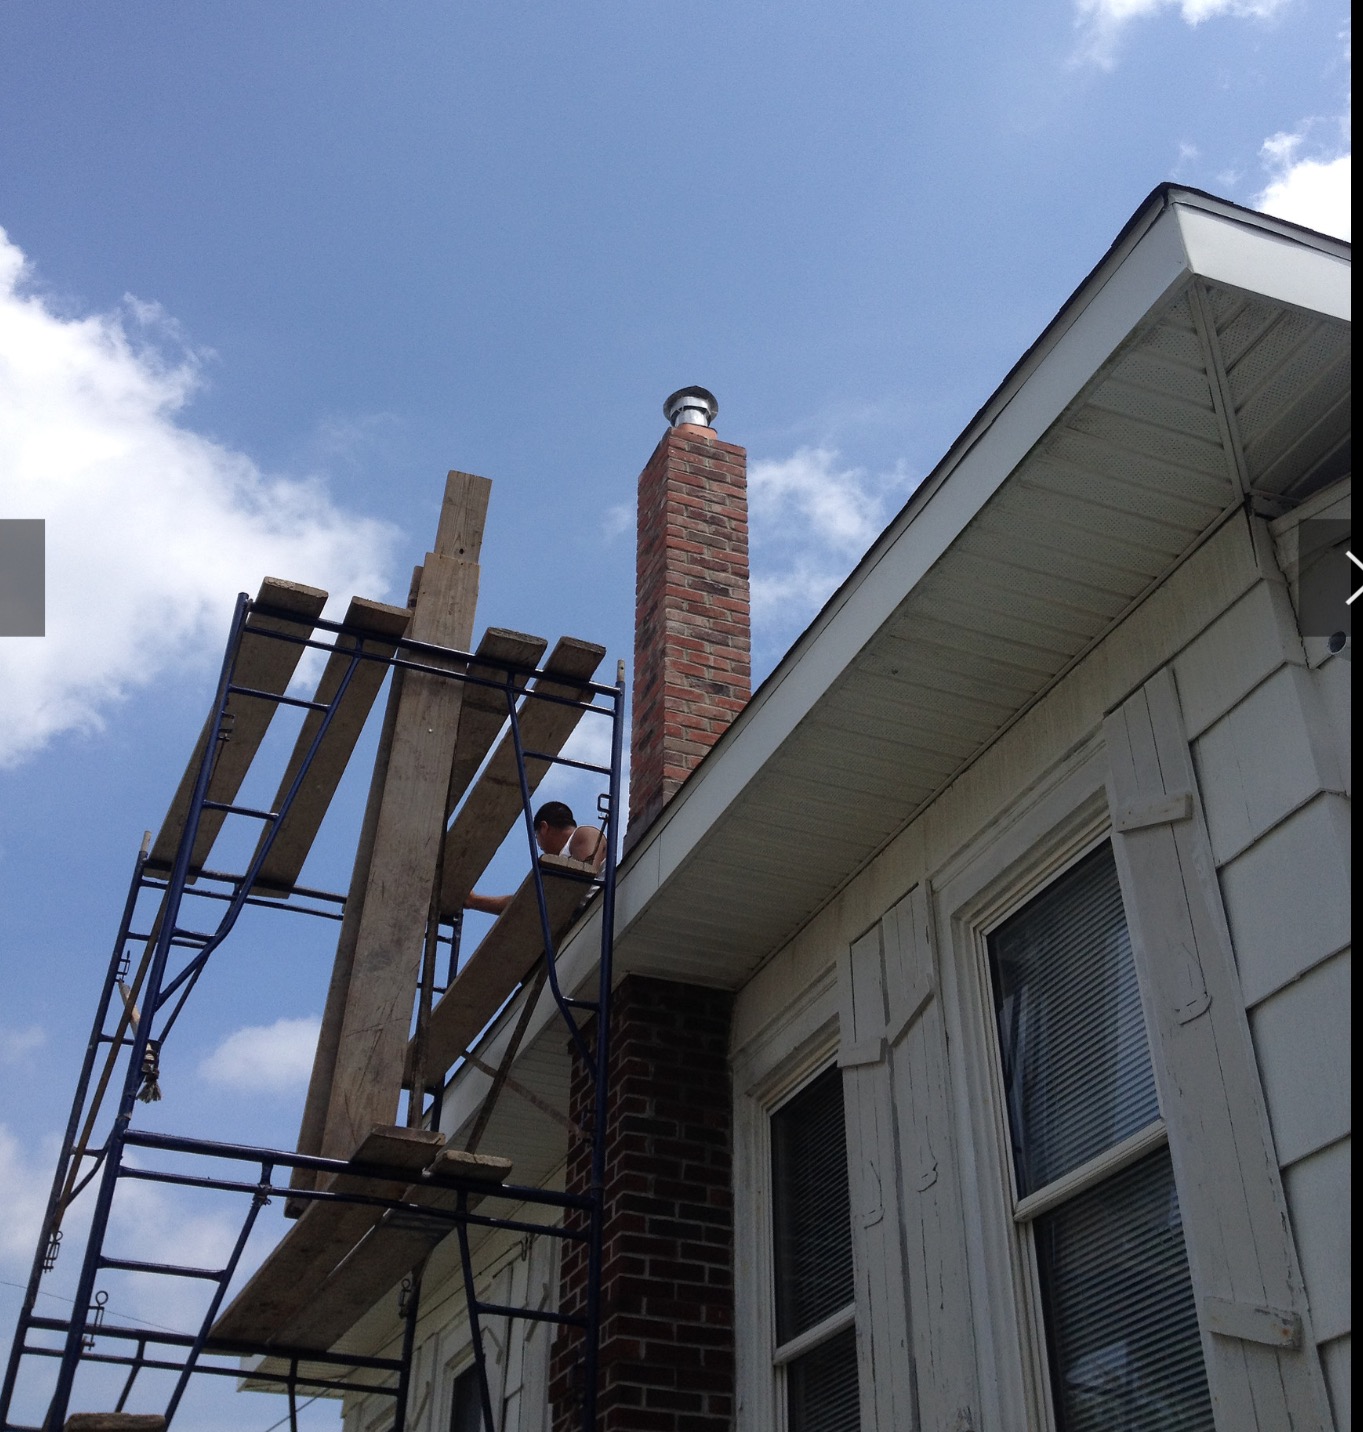 Scaffolding installed outside a home for a chimney service.